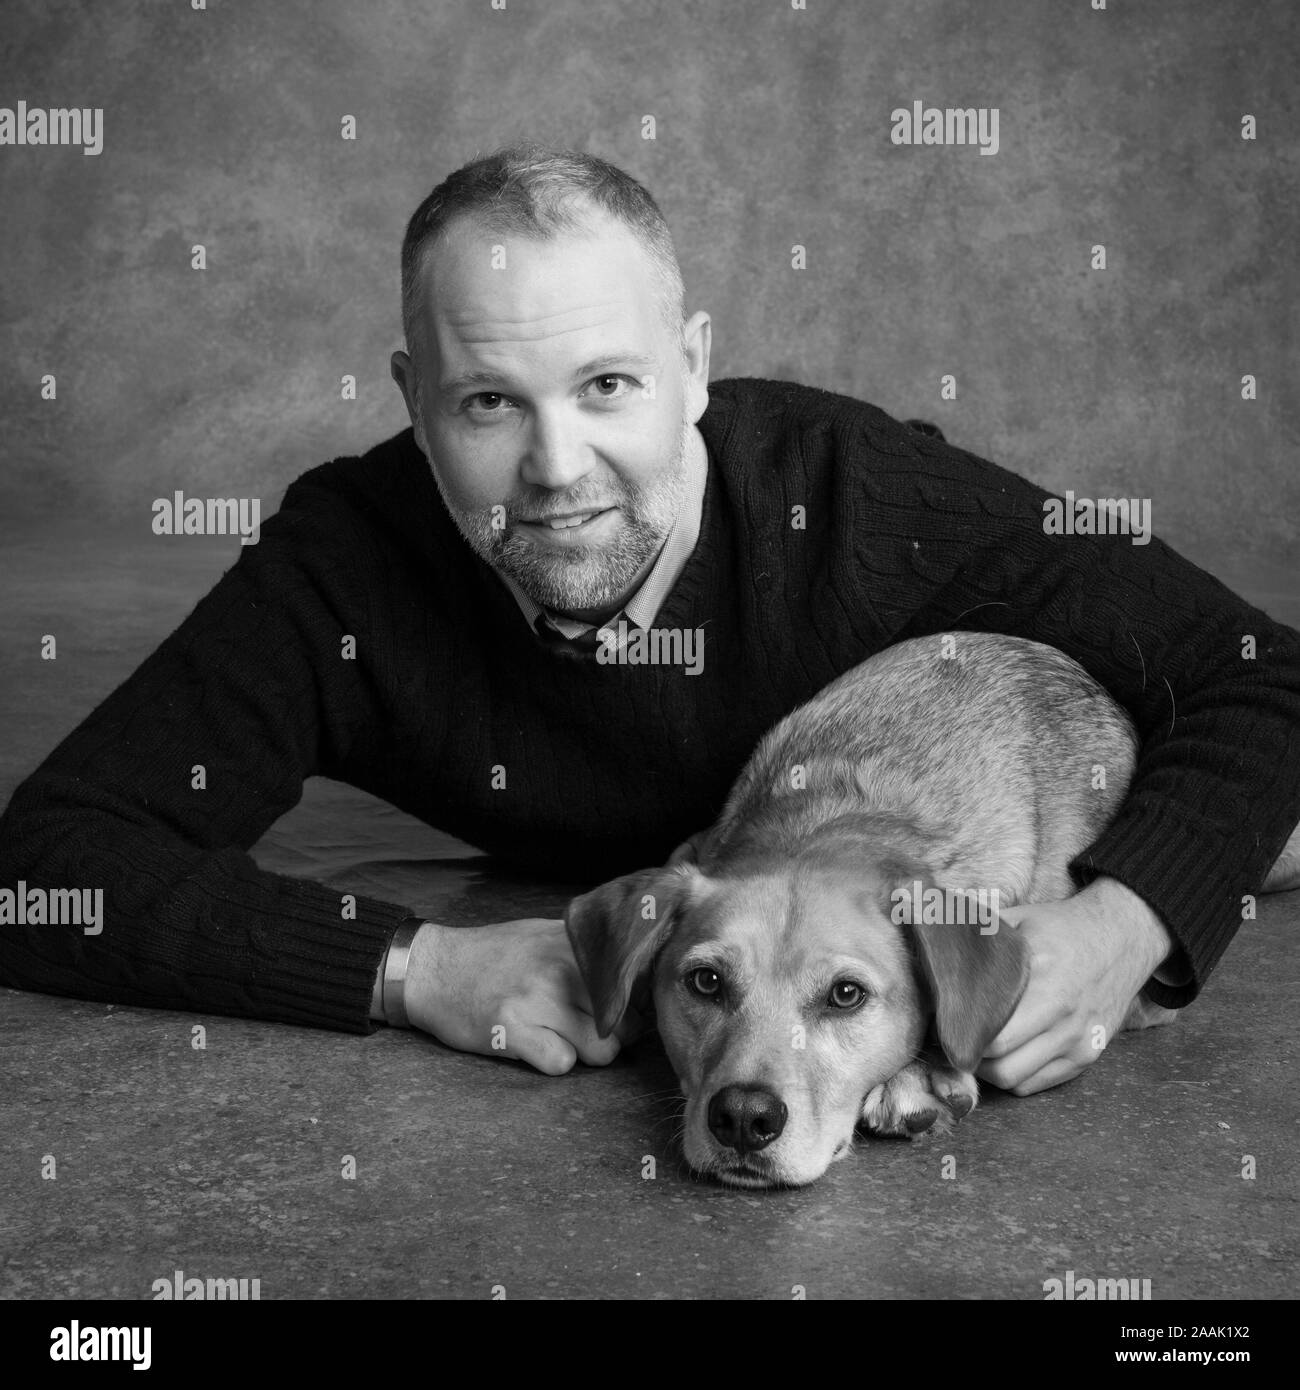 Portrait of man with dog Stock Photo